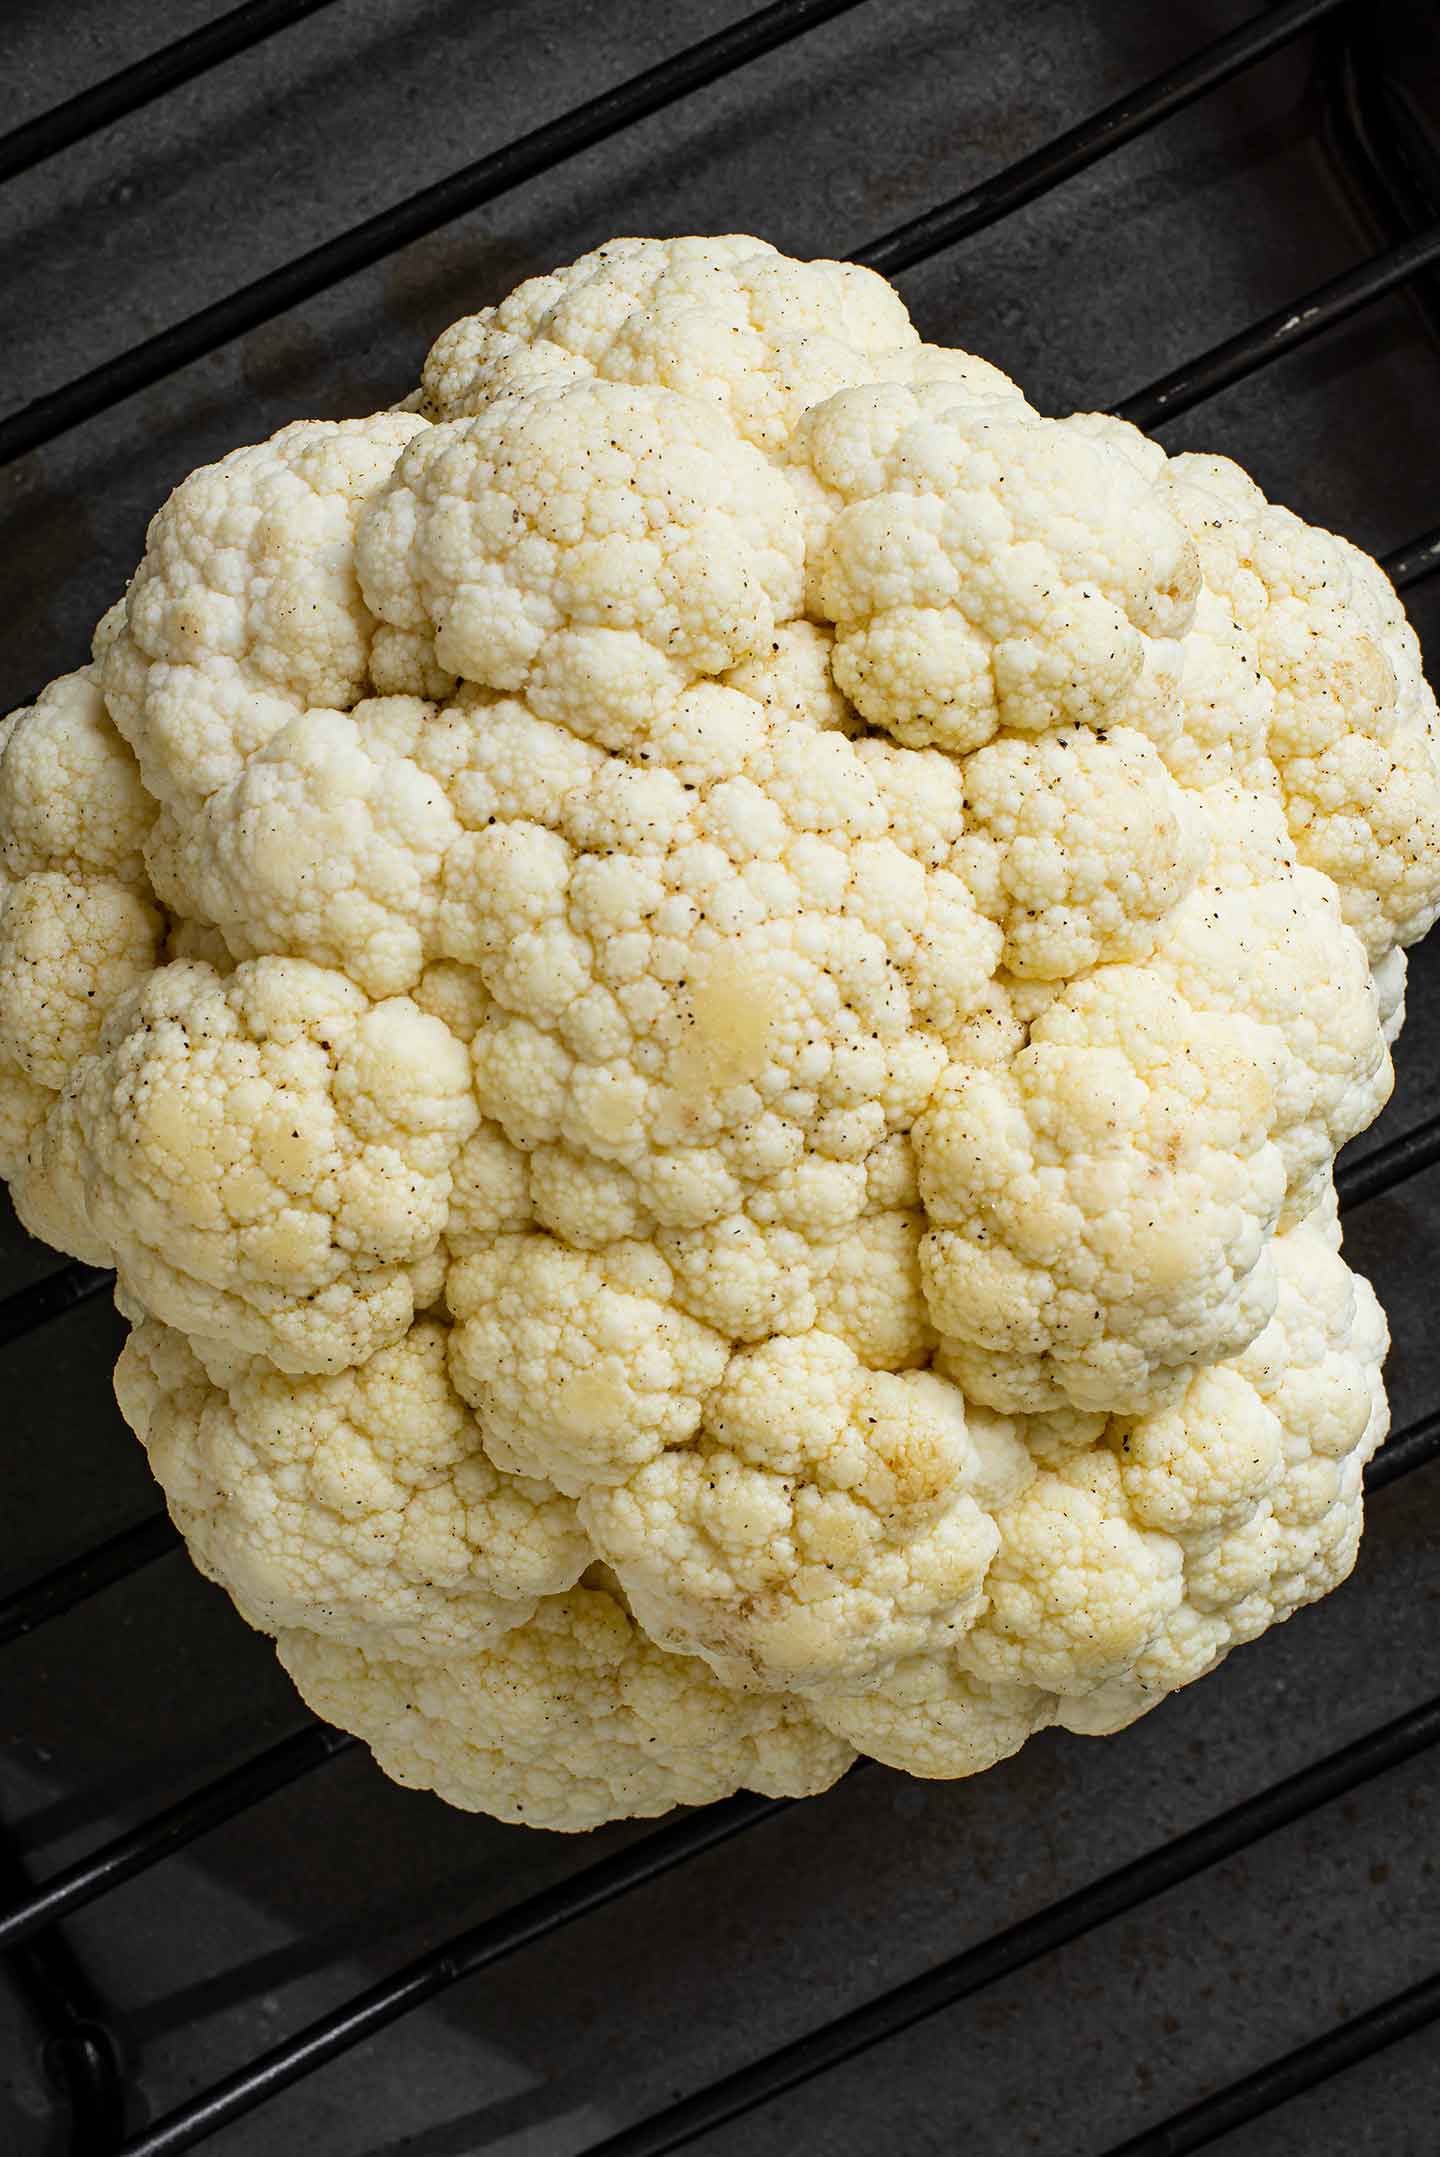 Top down view of a trimmed cauliflower, basted in oil, and placed on the rack of a roasting tray.